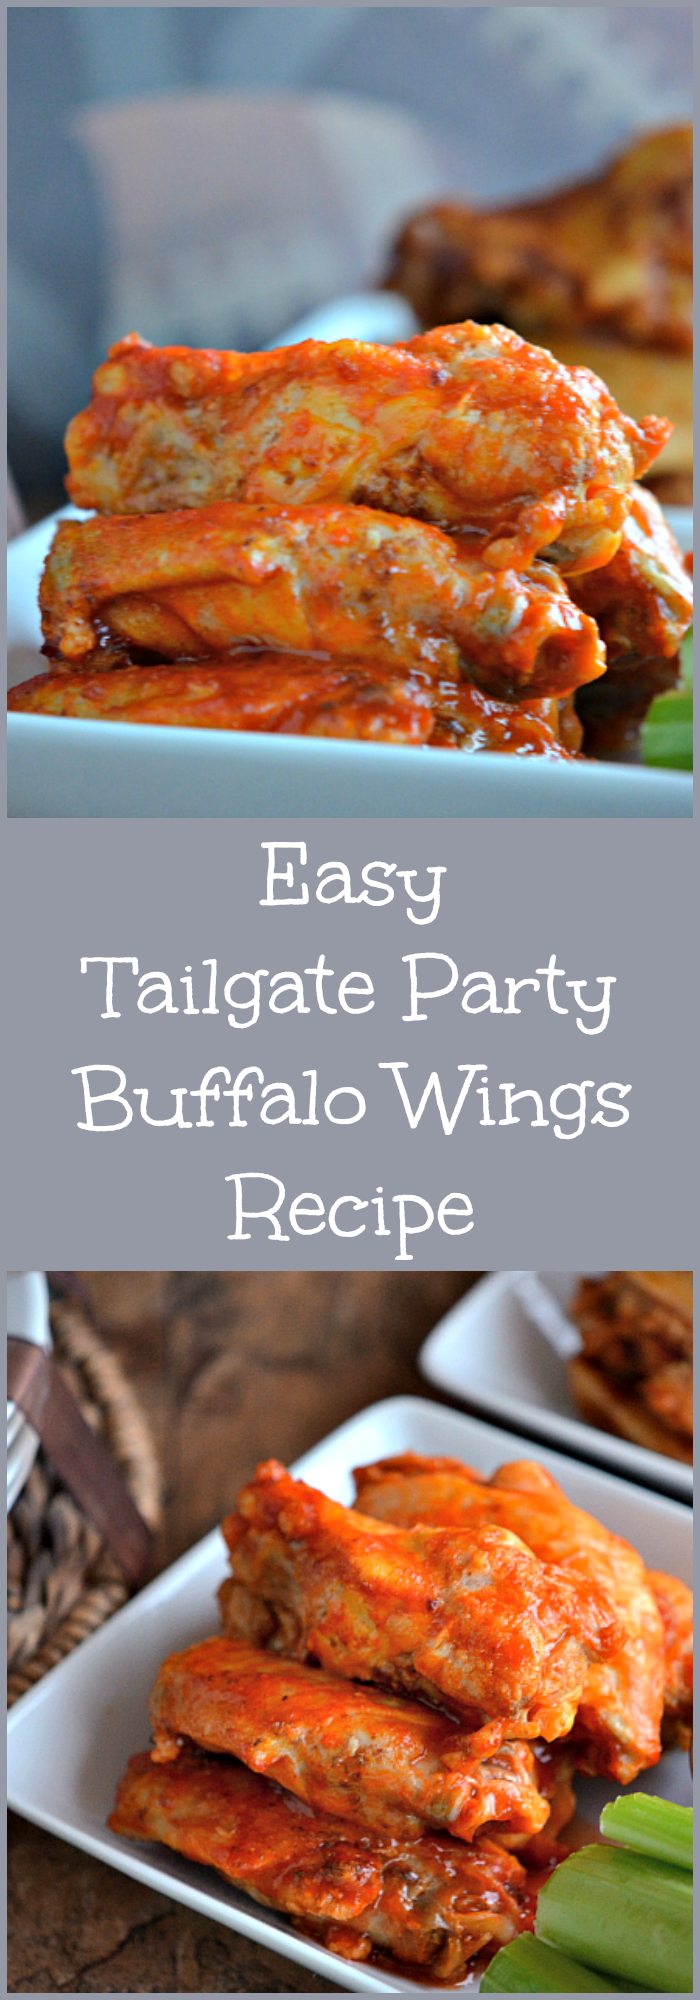 Enjoy these finger lickin' good Easy Tailgate Party Buffalo Wings on your next BIG game get-together. They are tasty, juicy, and the perfect tailgate party must-have. Get the recipe at CleverlyMe.com